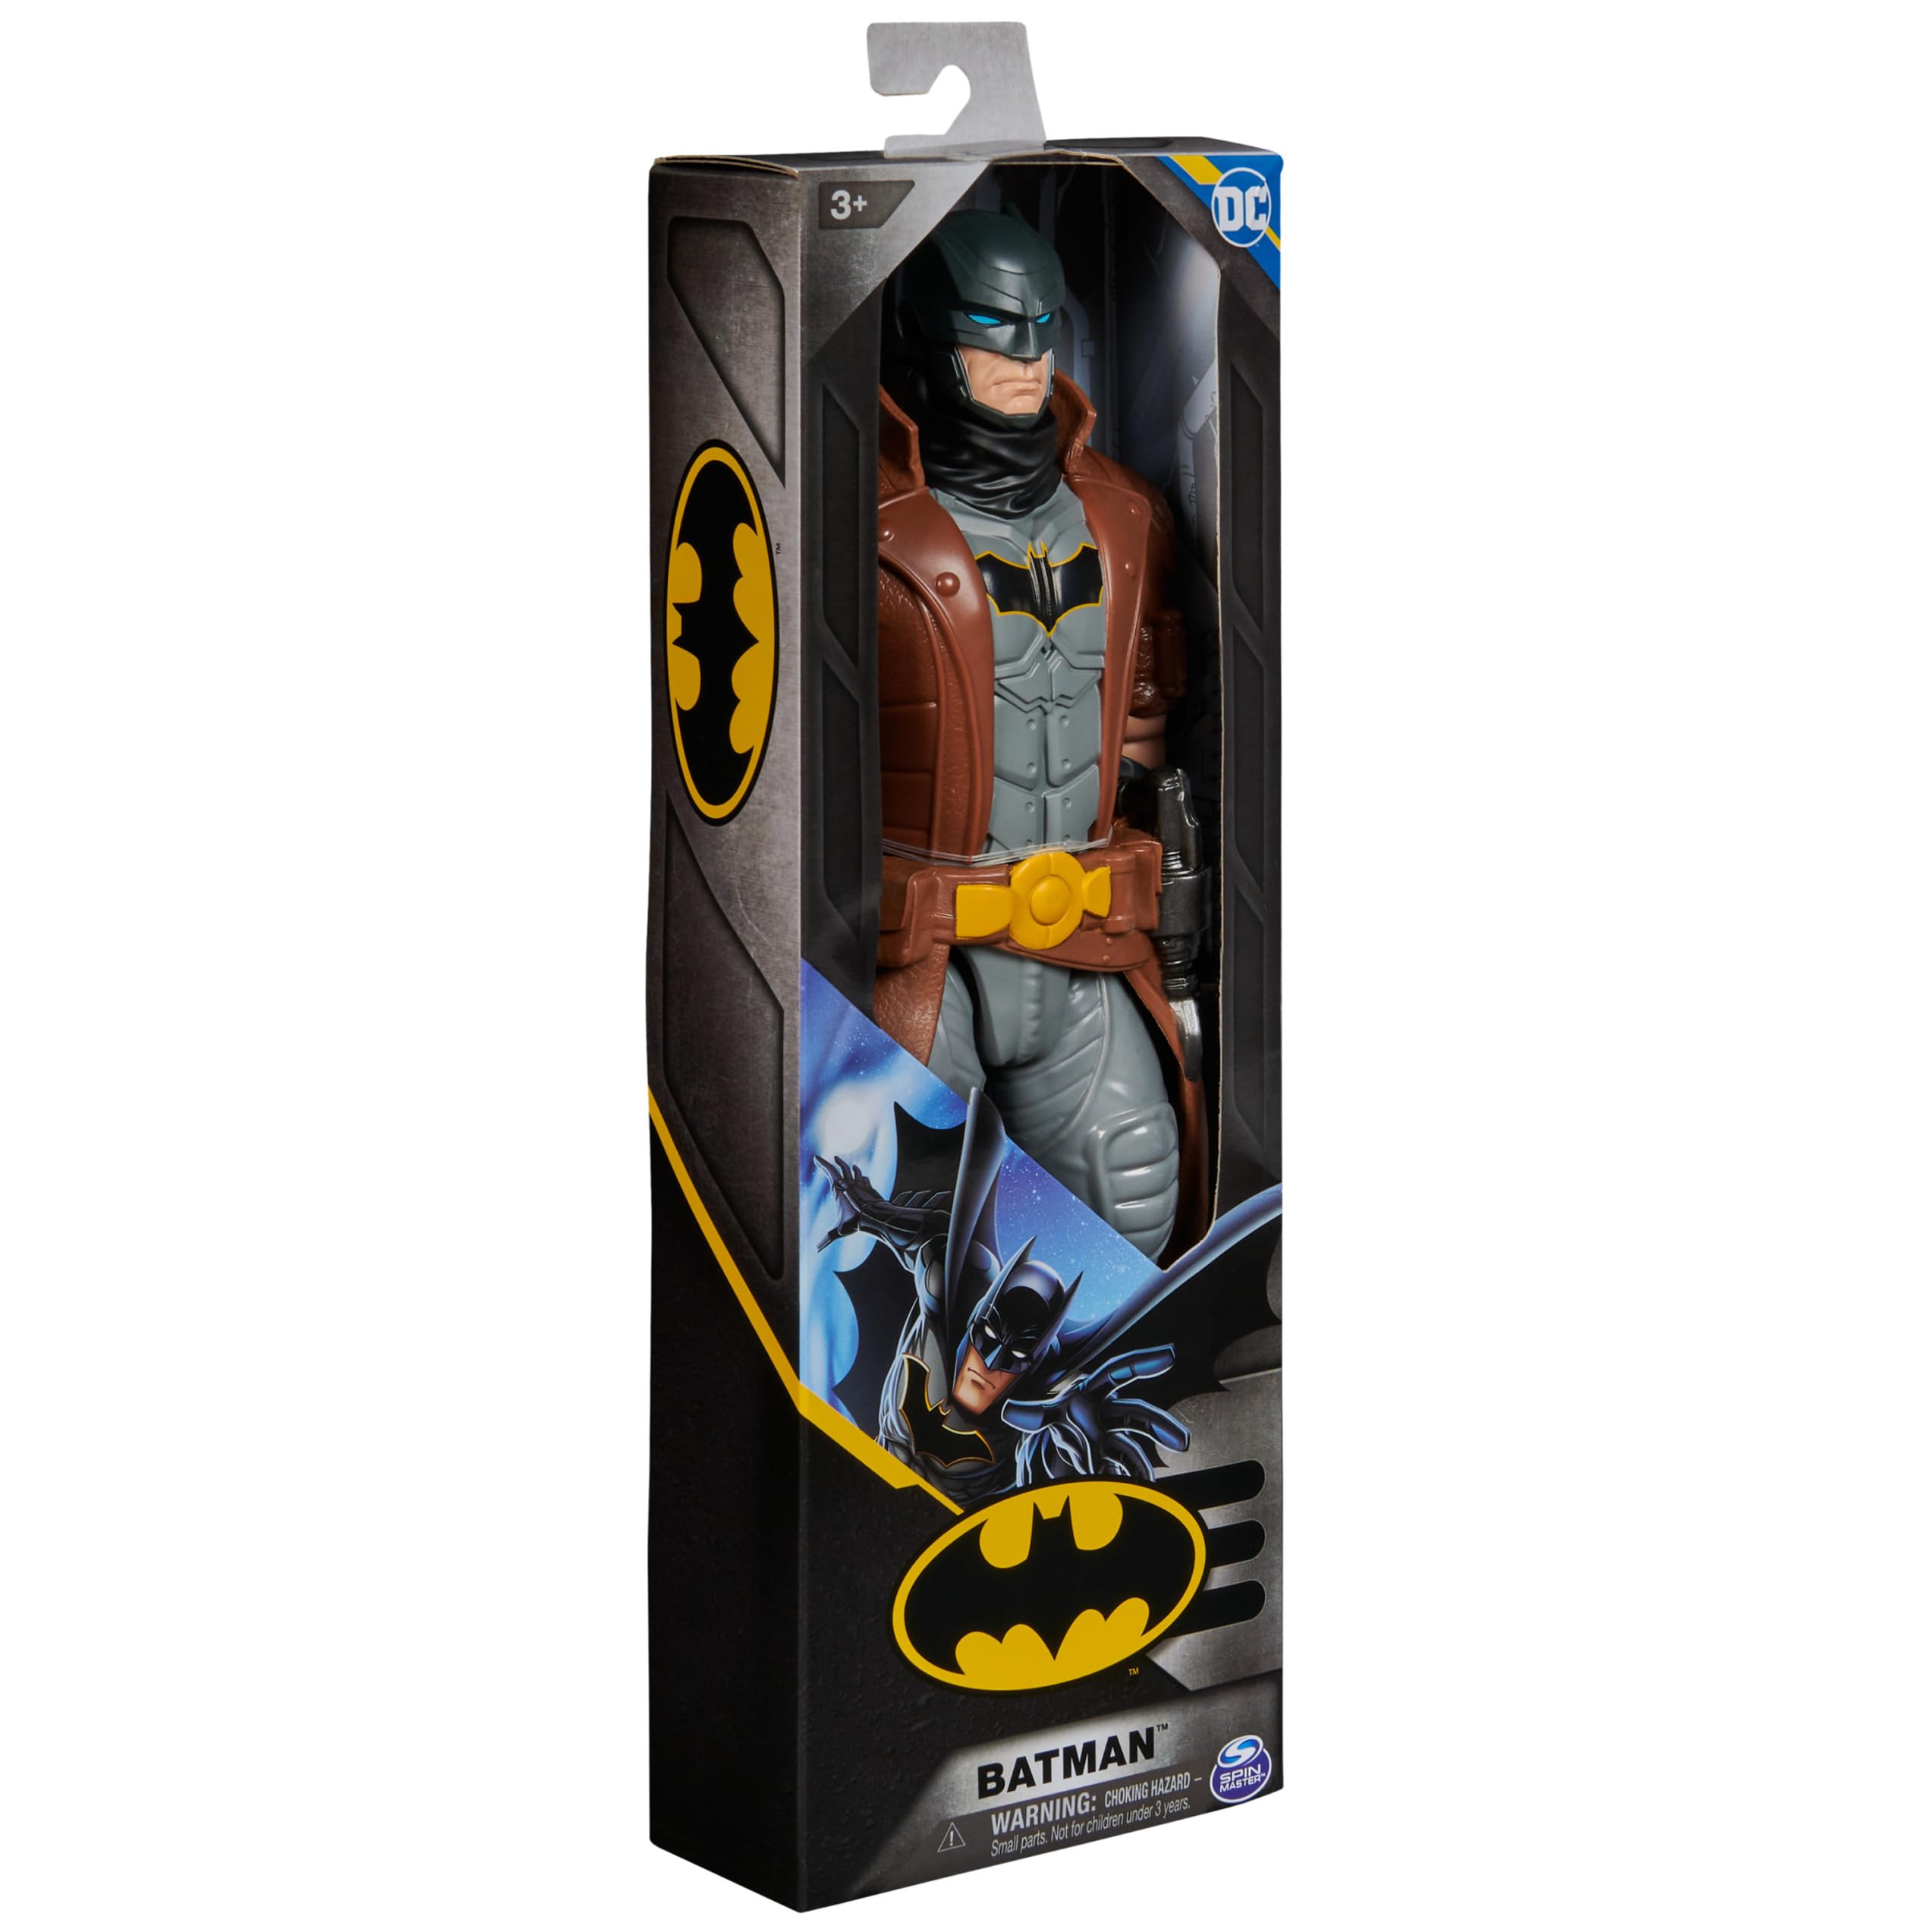 DC Comics, Batman Action Figure, 12-inch, Kids Toys for Boys and Girls, Ages 3+